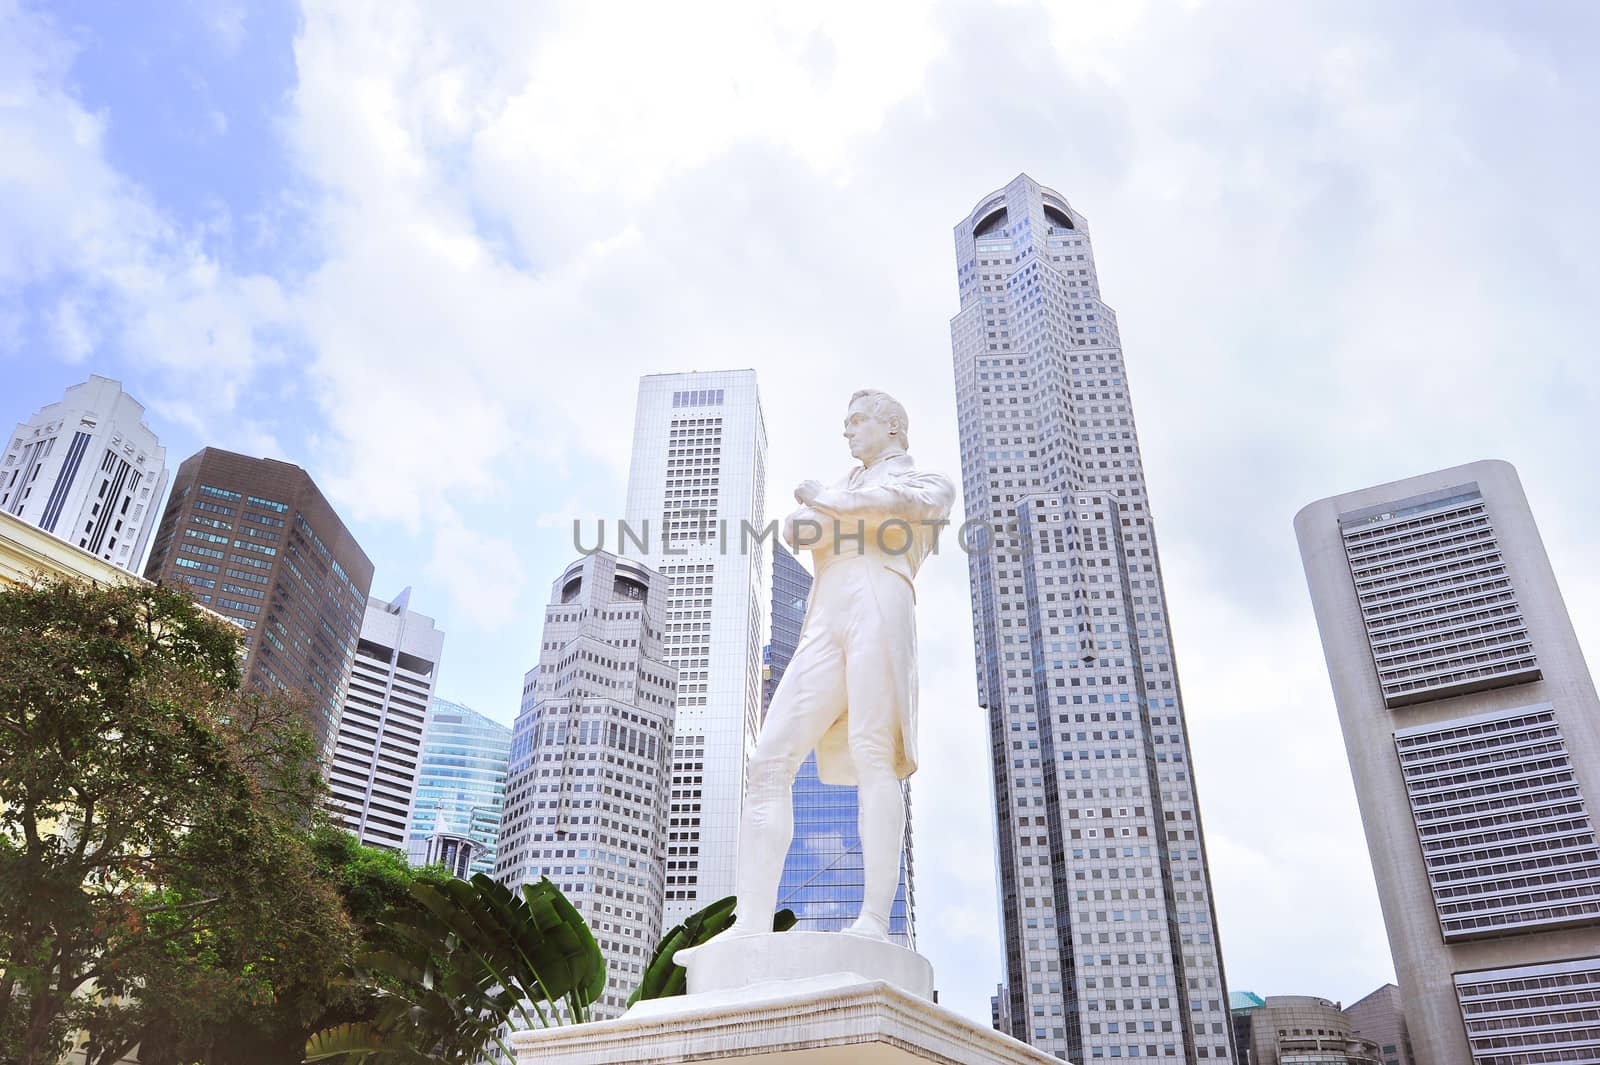 Statue of Sir Tomas Stamford Raffles - best known for his founding of the city of Singapore. He is often described as the "Father of Singapore".